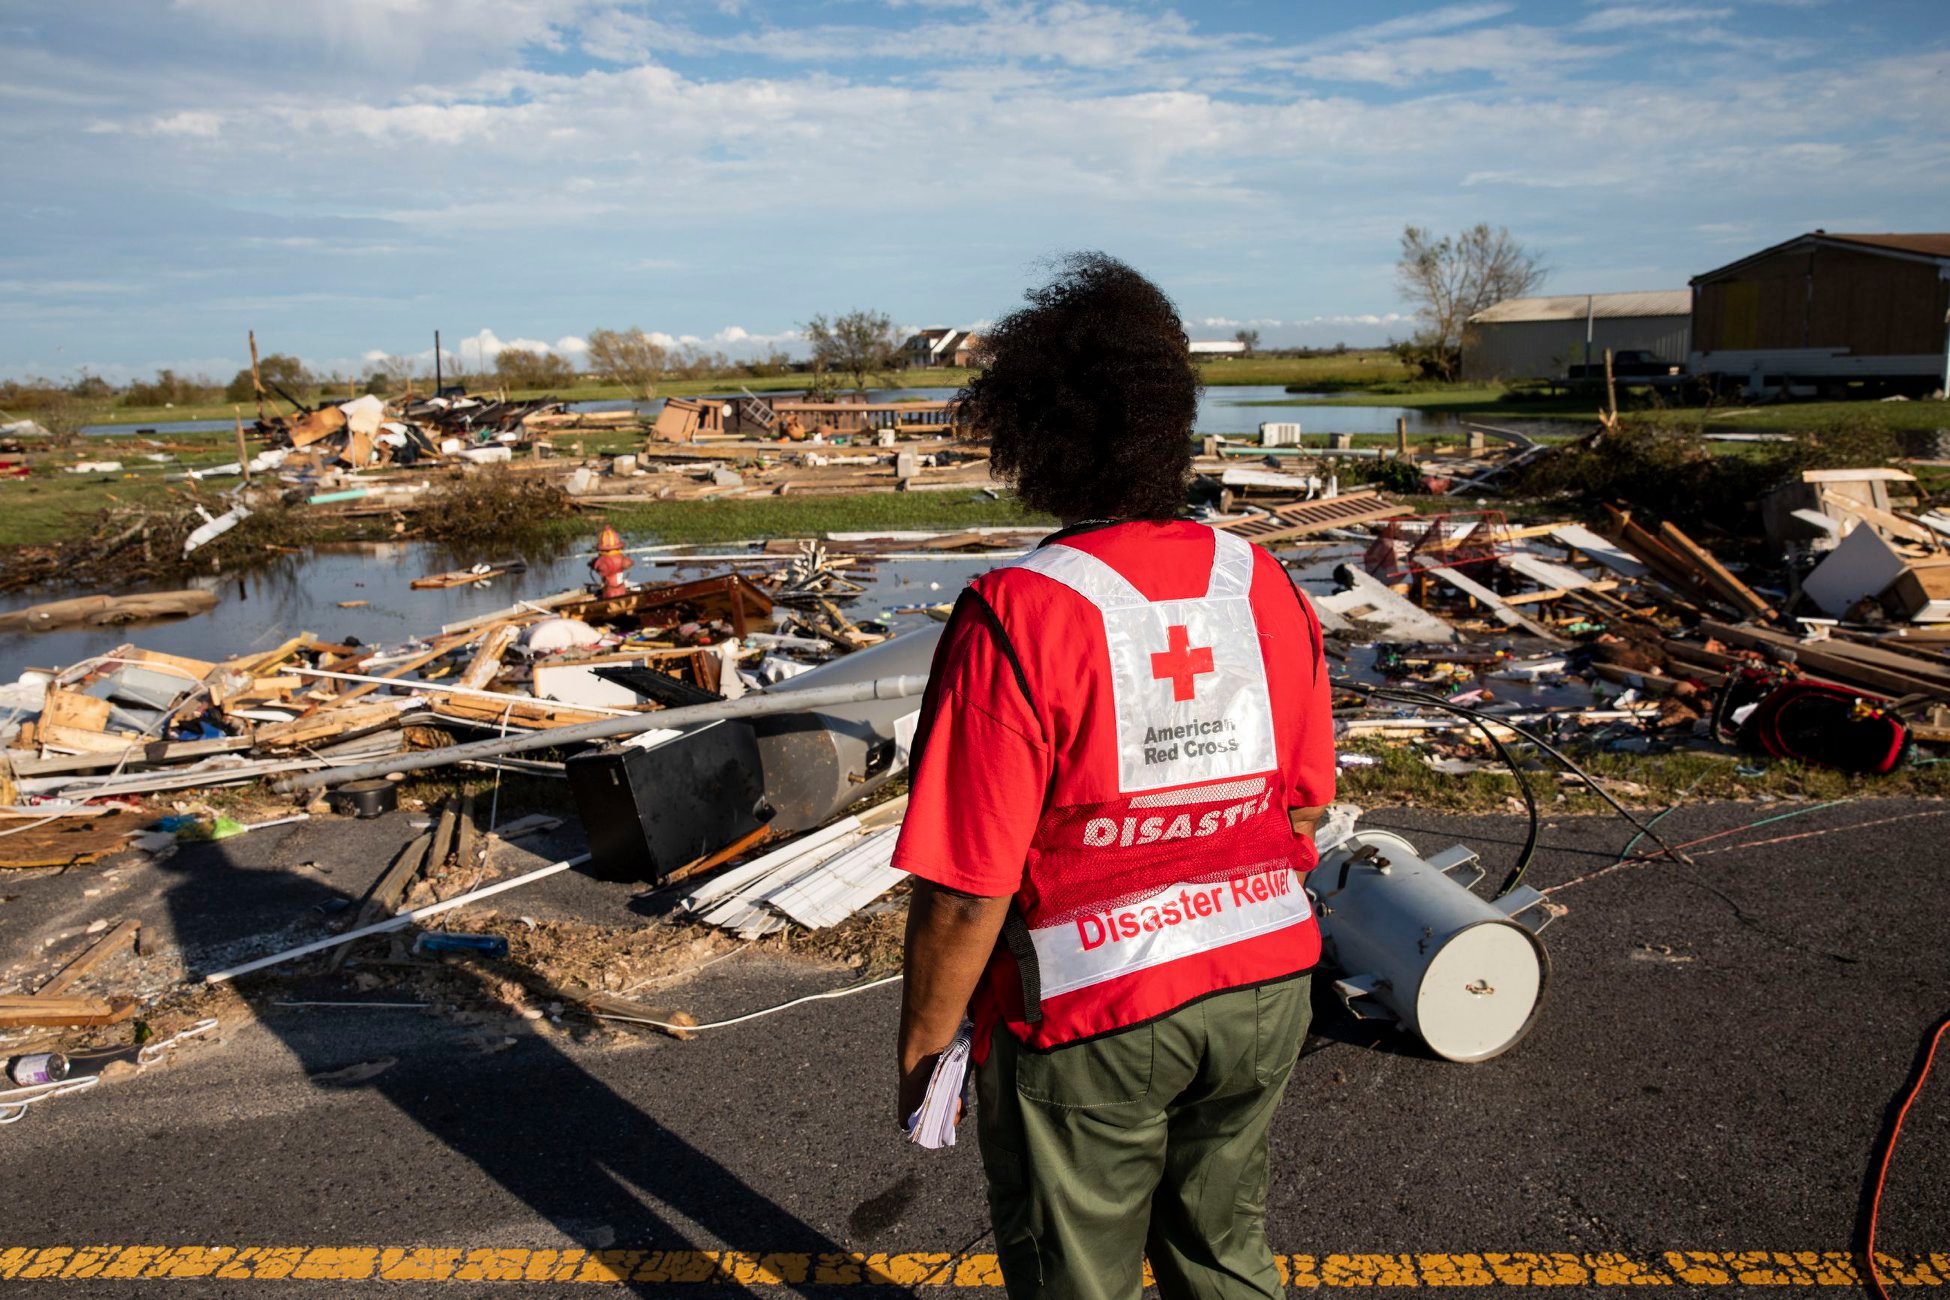 The American Red Cross Issues NFTs for People Suffered from Hurricane Ian